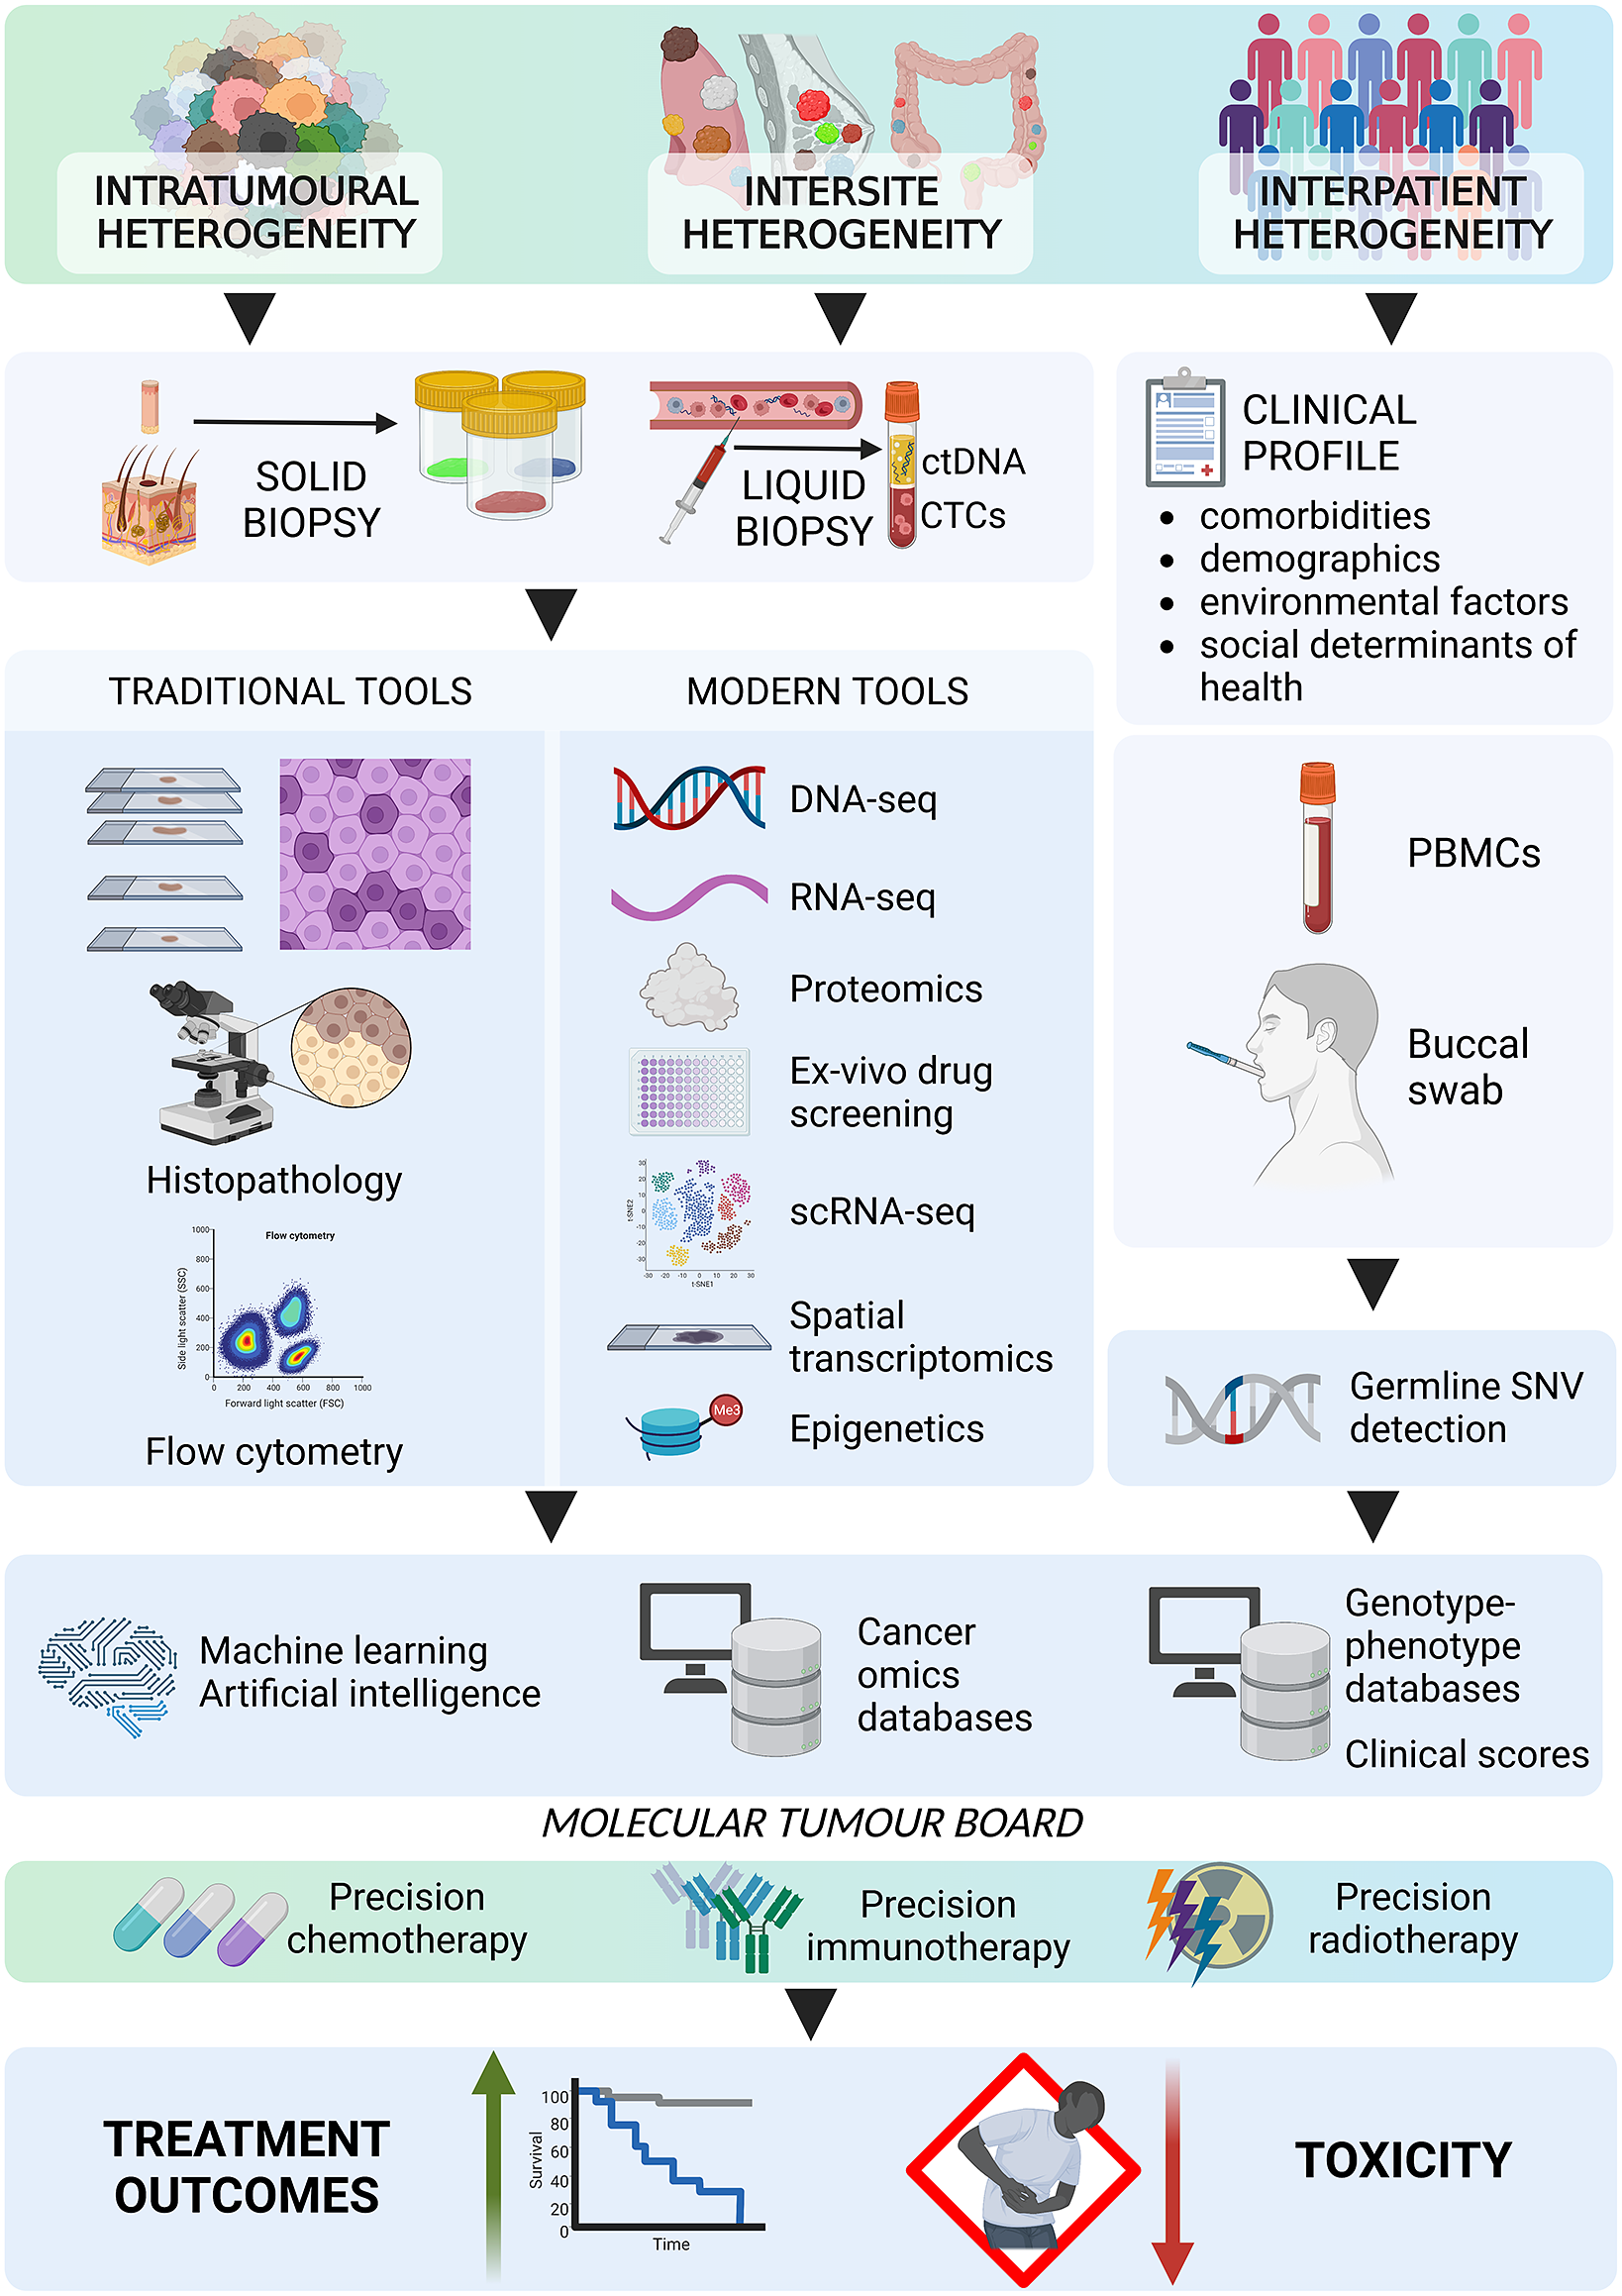 graphical abstract for Heterogeneity in precision oncology - open in full screen